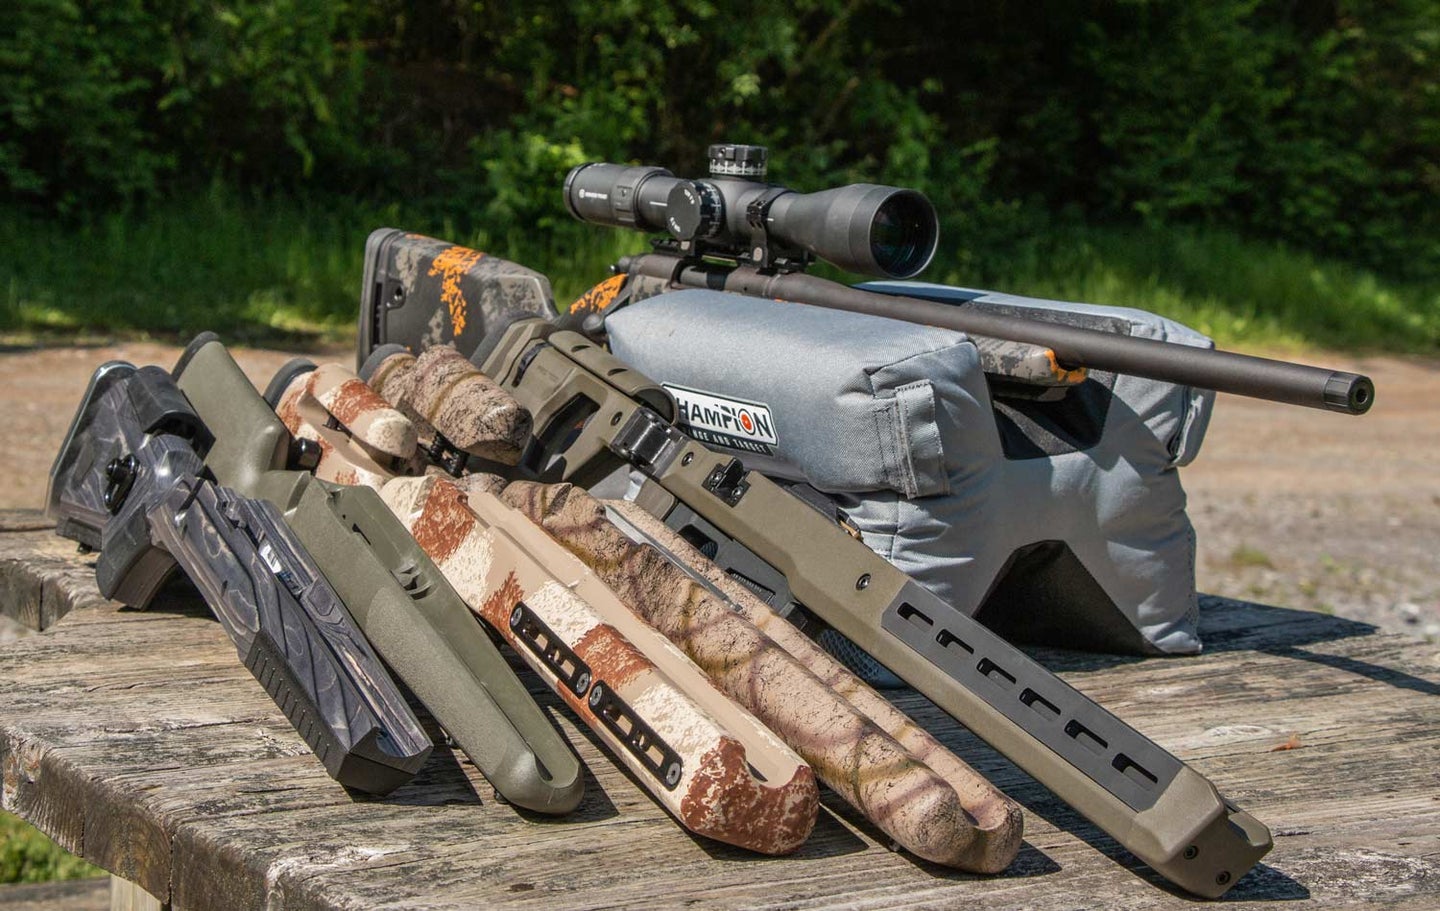 A lineup of aftermarket rifle stocks